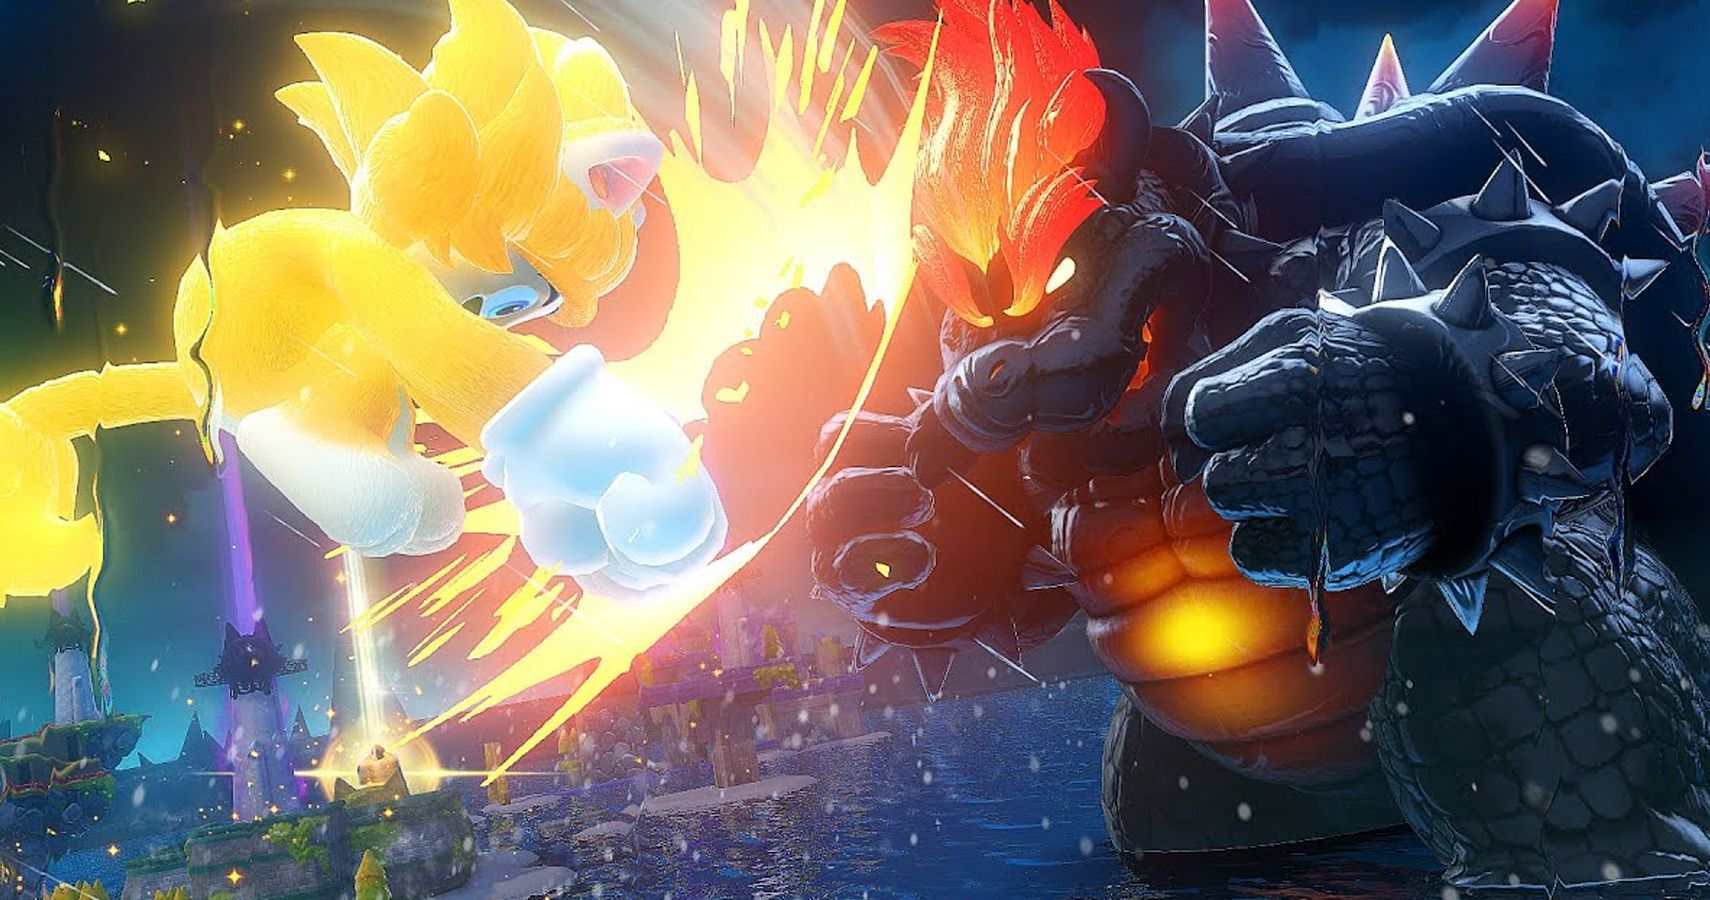 Super Mario 3D World + Bowser's Fury Preview: The Fast And The Furious